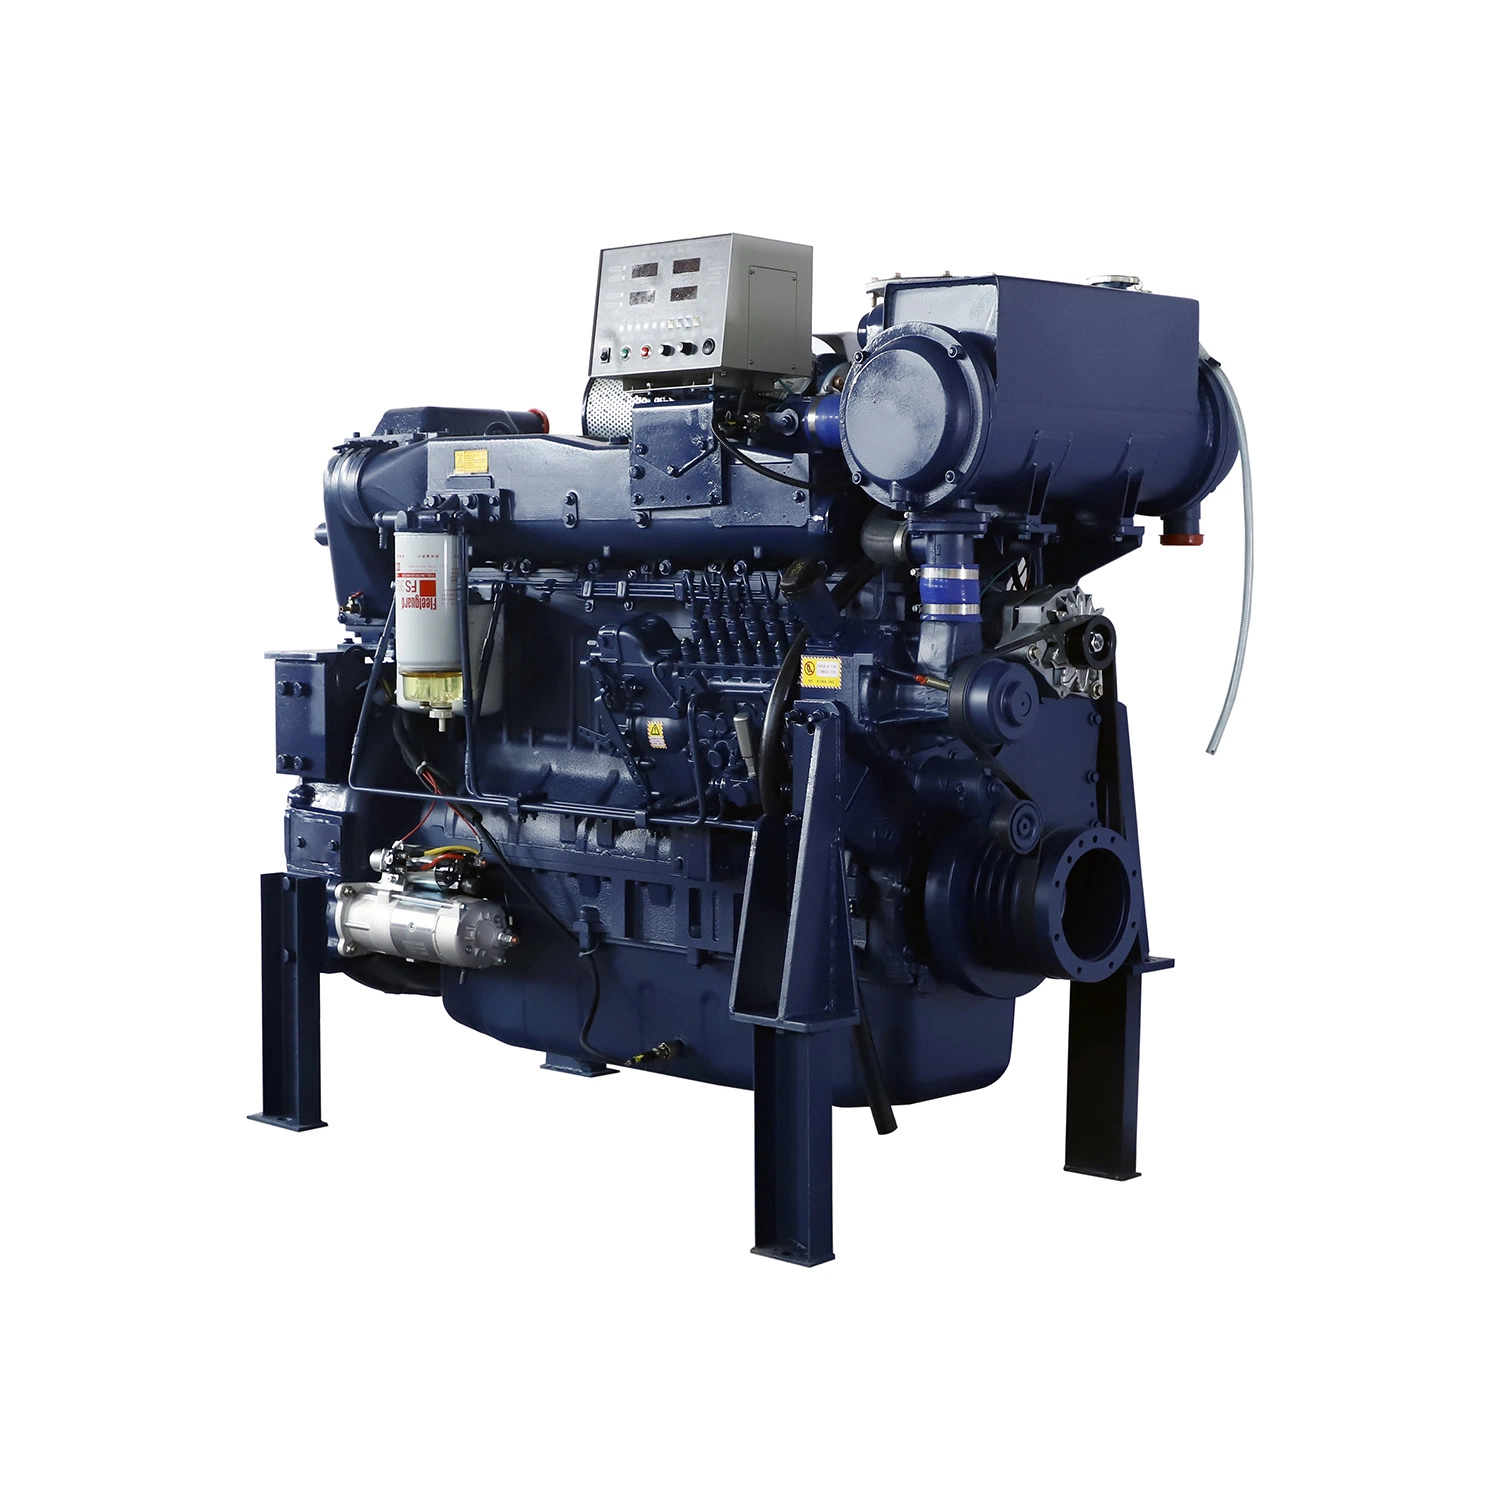 New Condition Water Cooled 4 Stroke Multi-Cylinder Diesel Engines with Electric Start for Ship